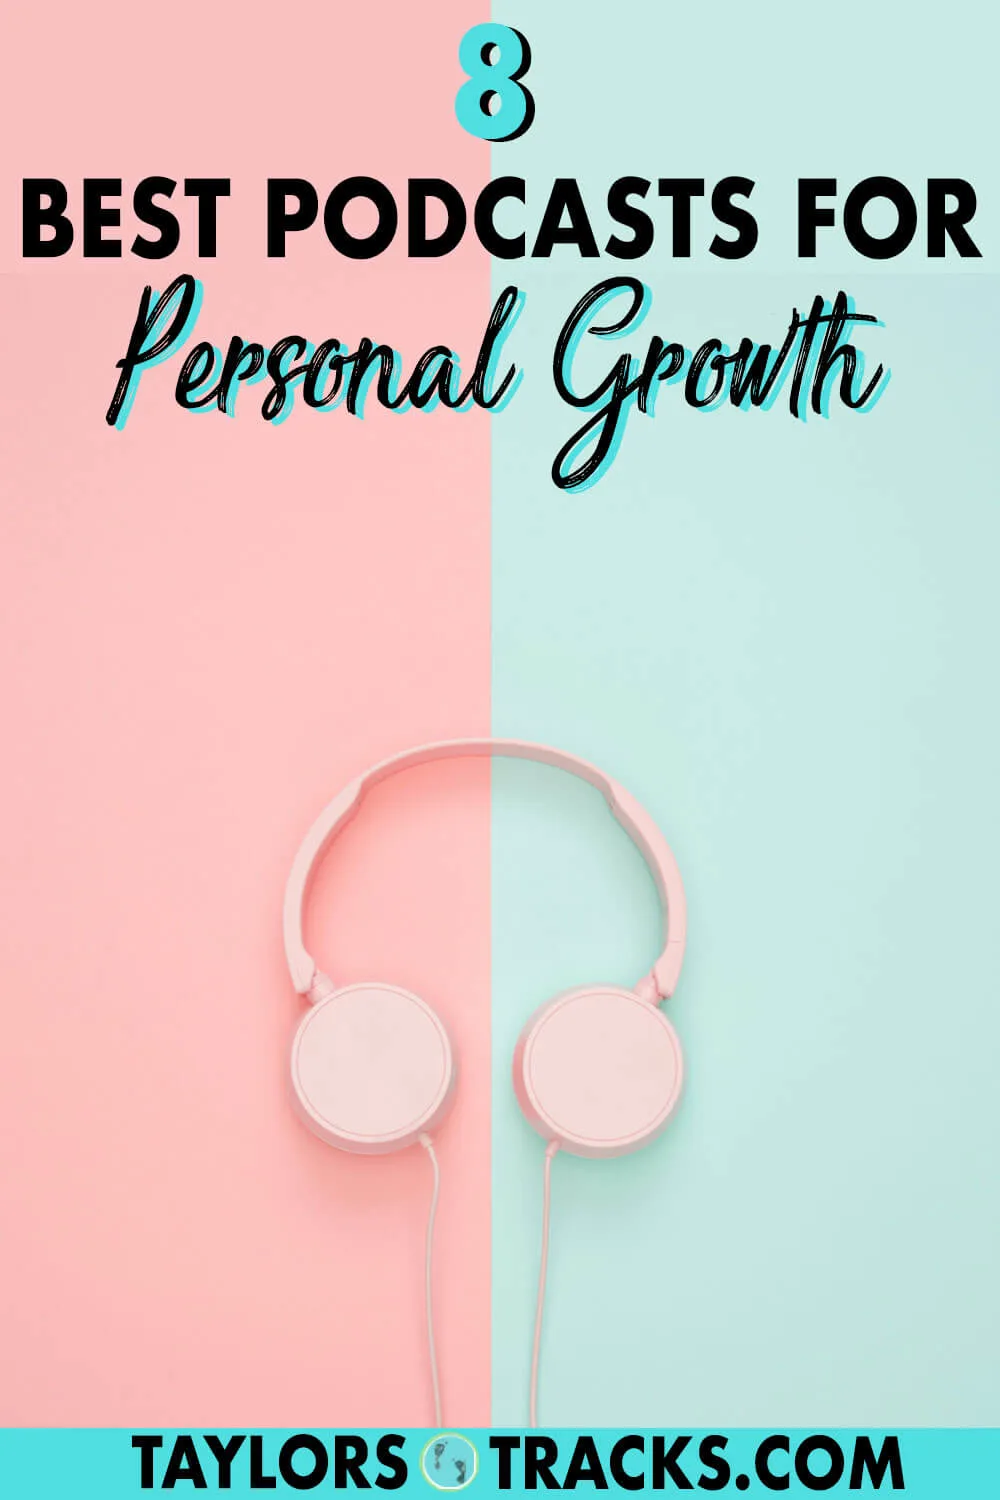 Personal growth doesn’t have be all about doing the right things, it’s also about being the right person. These personal development podcasts combine spirituality and self improvement to balance the masculine and feminine that is needed to live a life of getting shit done with ease. Click to find your new favourite self growth podcast!